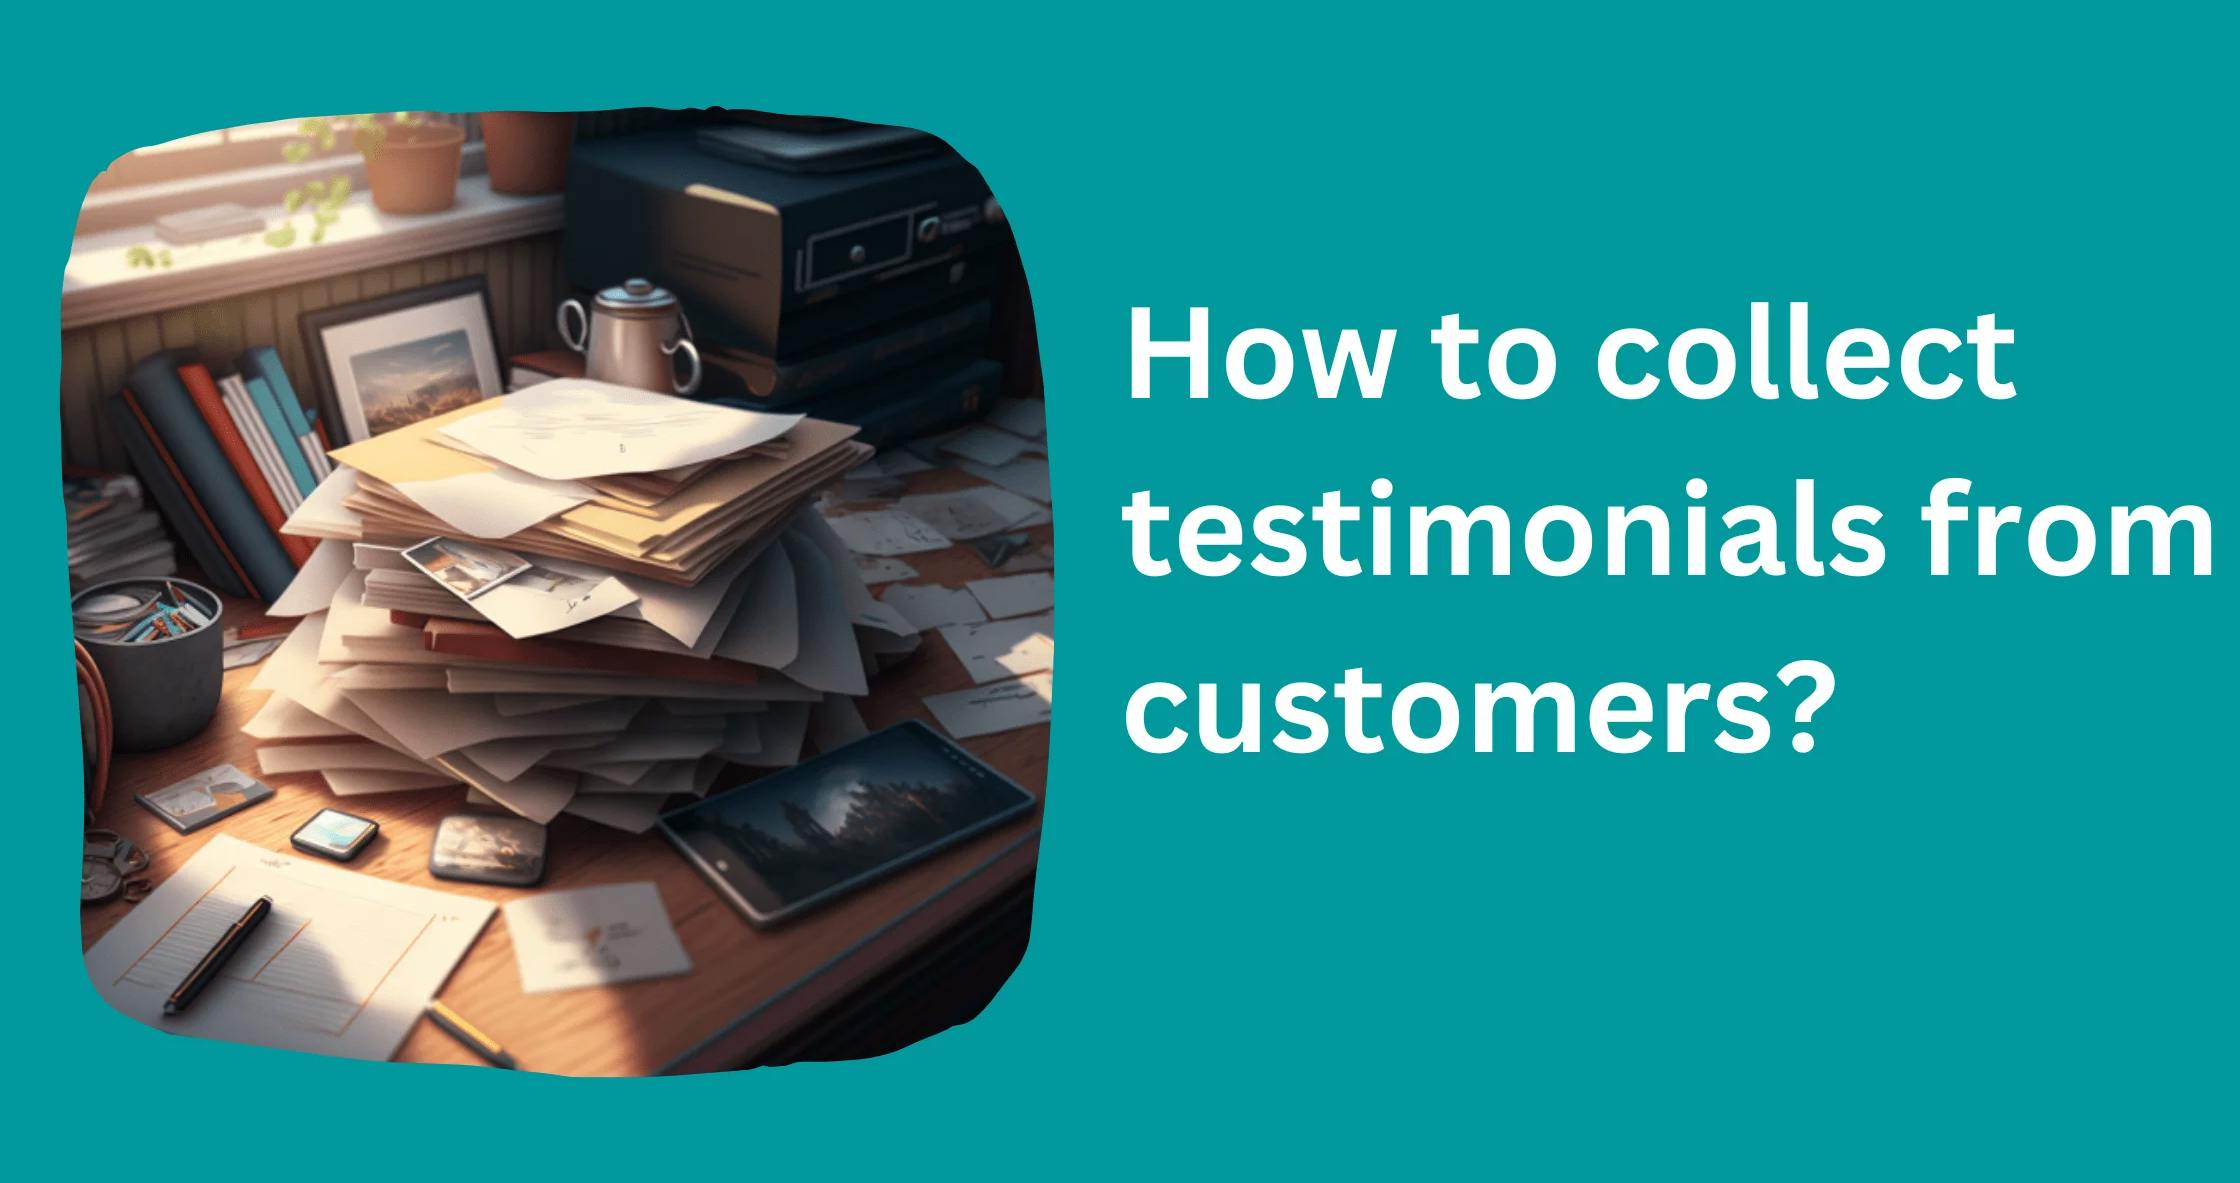 How to collect testimonials from customers?